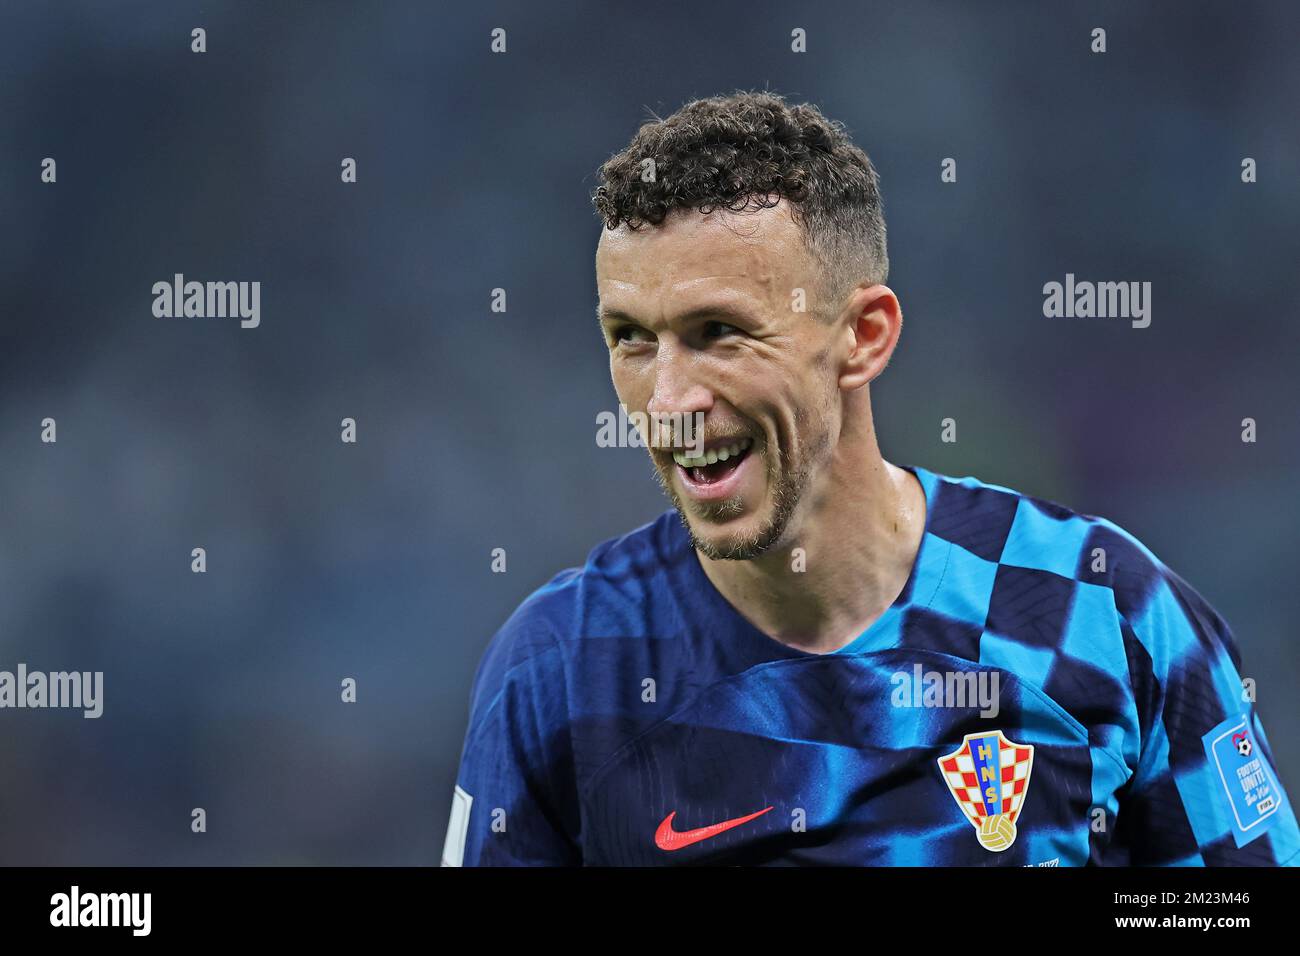 Doha, Qatar. 13th Dec, 2022. Ivan Perisic of Croatia, during the match between Argentina and Croatia, for the semifinal of the FIFA World Cup Qatar 2022, at Lusail Stadium, this Tuesday, 13. 30761 (Heuler Andrey/SPP) Credit: SPP Sport Press Photo. /Alamy Live News Stock Photo